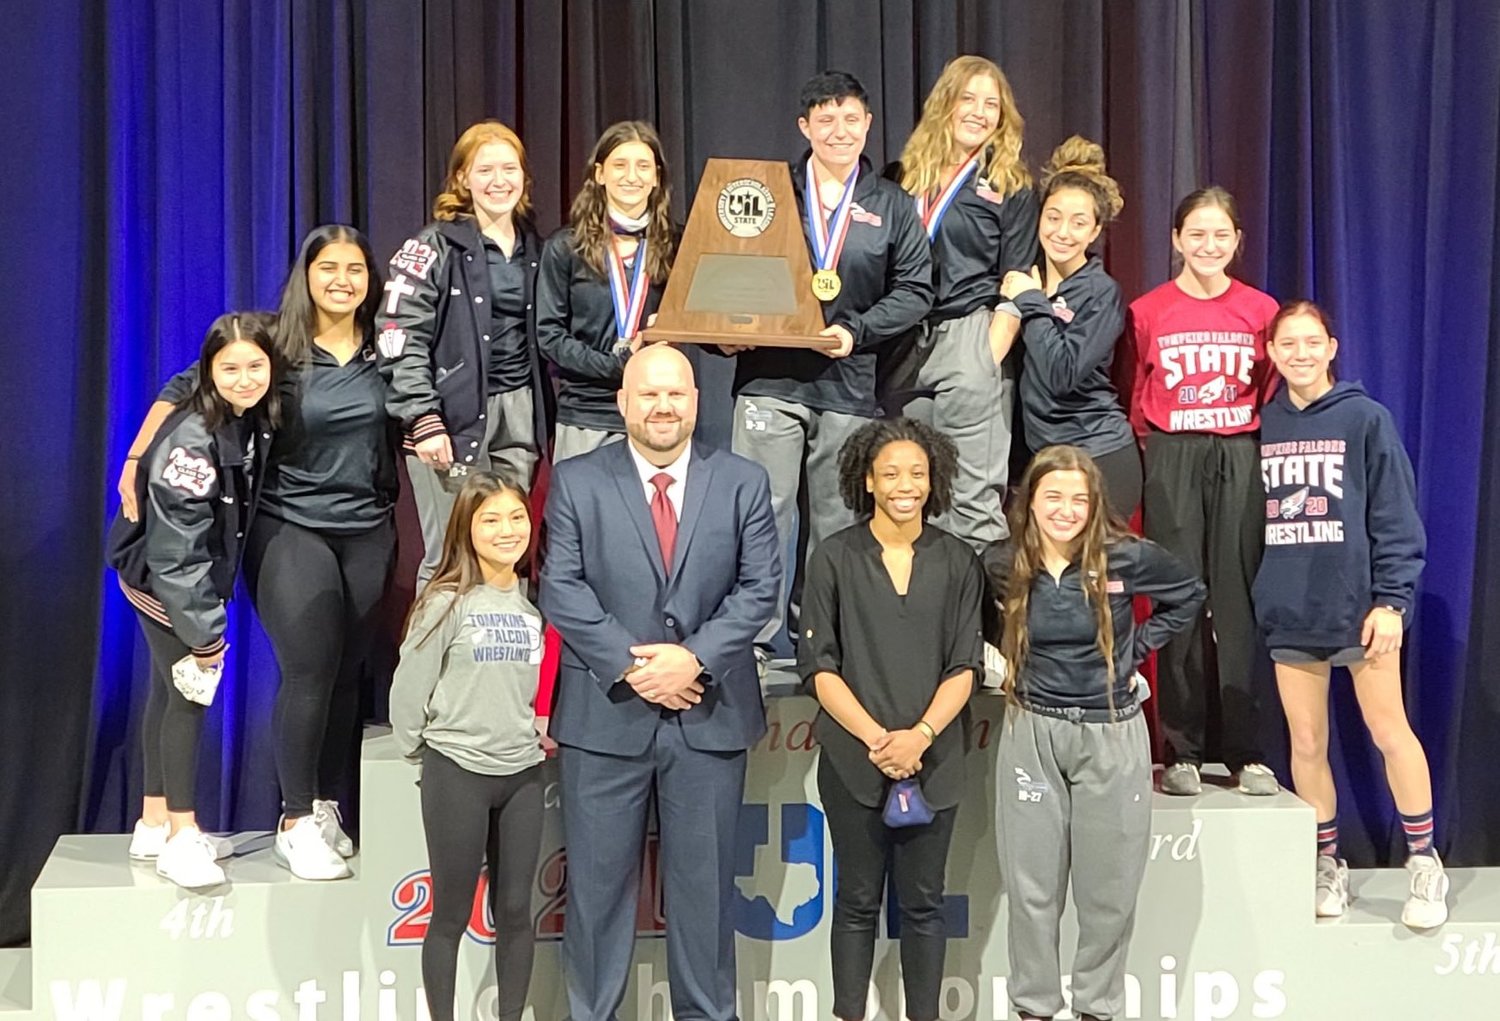 For the second straight year, Tompkins' girls wrestling team finished second at the UIL Class 6A state tournament at the Berry Center in Cypress.